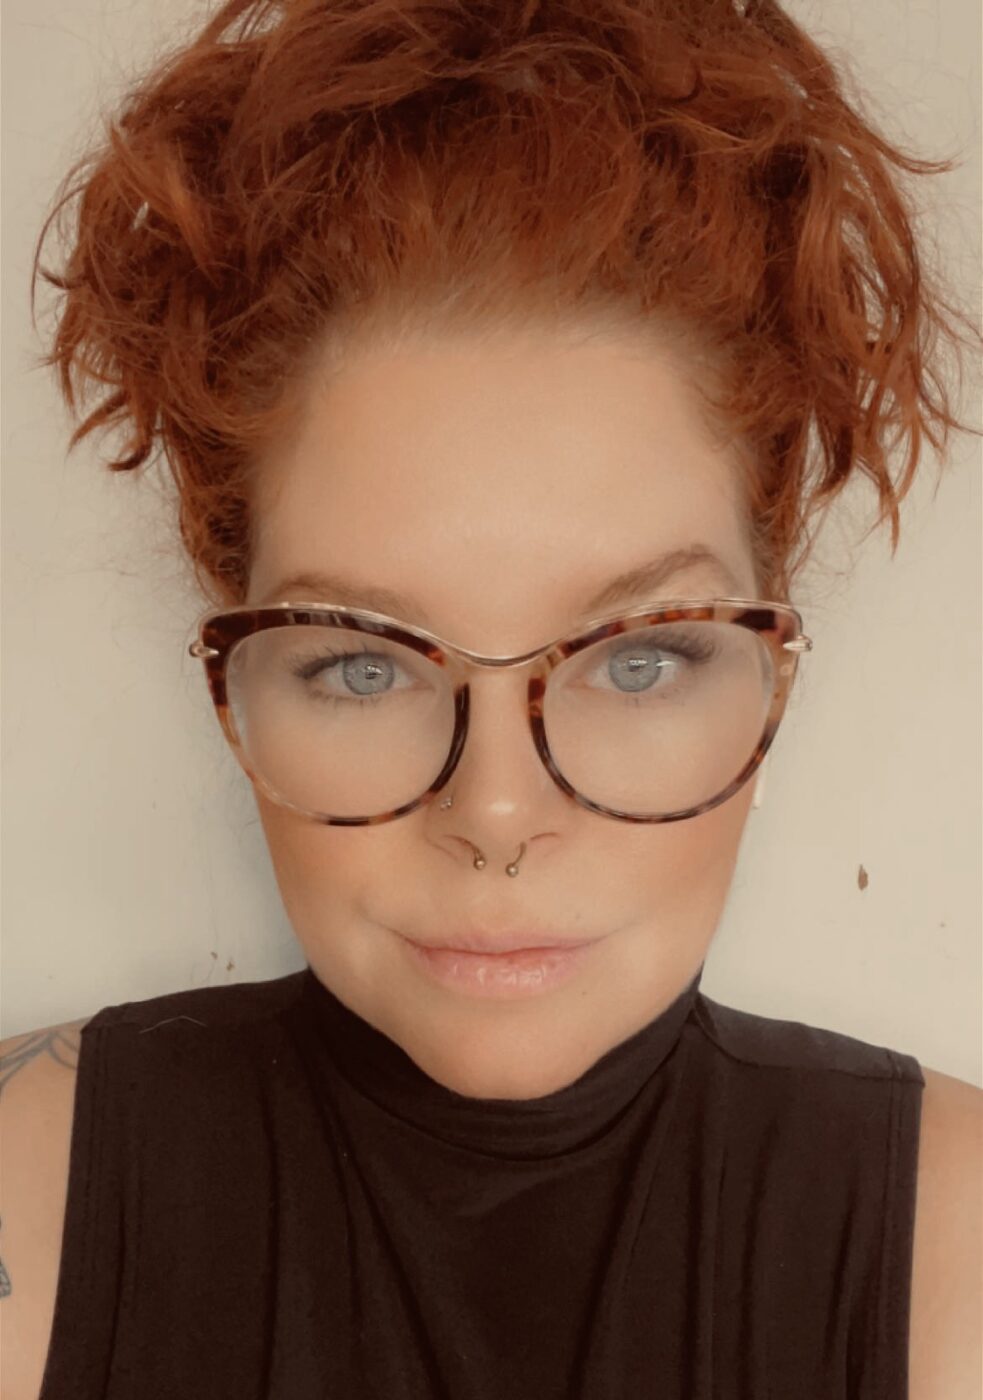 Rebekah has fair skin with tattoos on her arm, and is wearing a black turtleneck, with red tortoiseshell glasses and her hair is reddish-brown and pulled up in a bun.